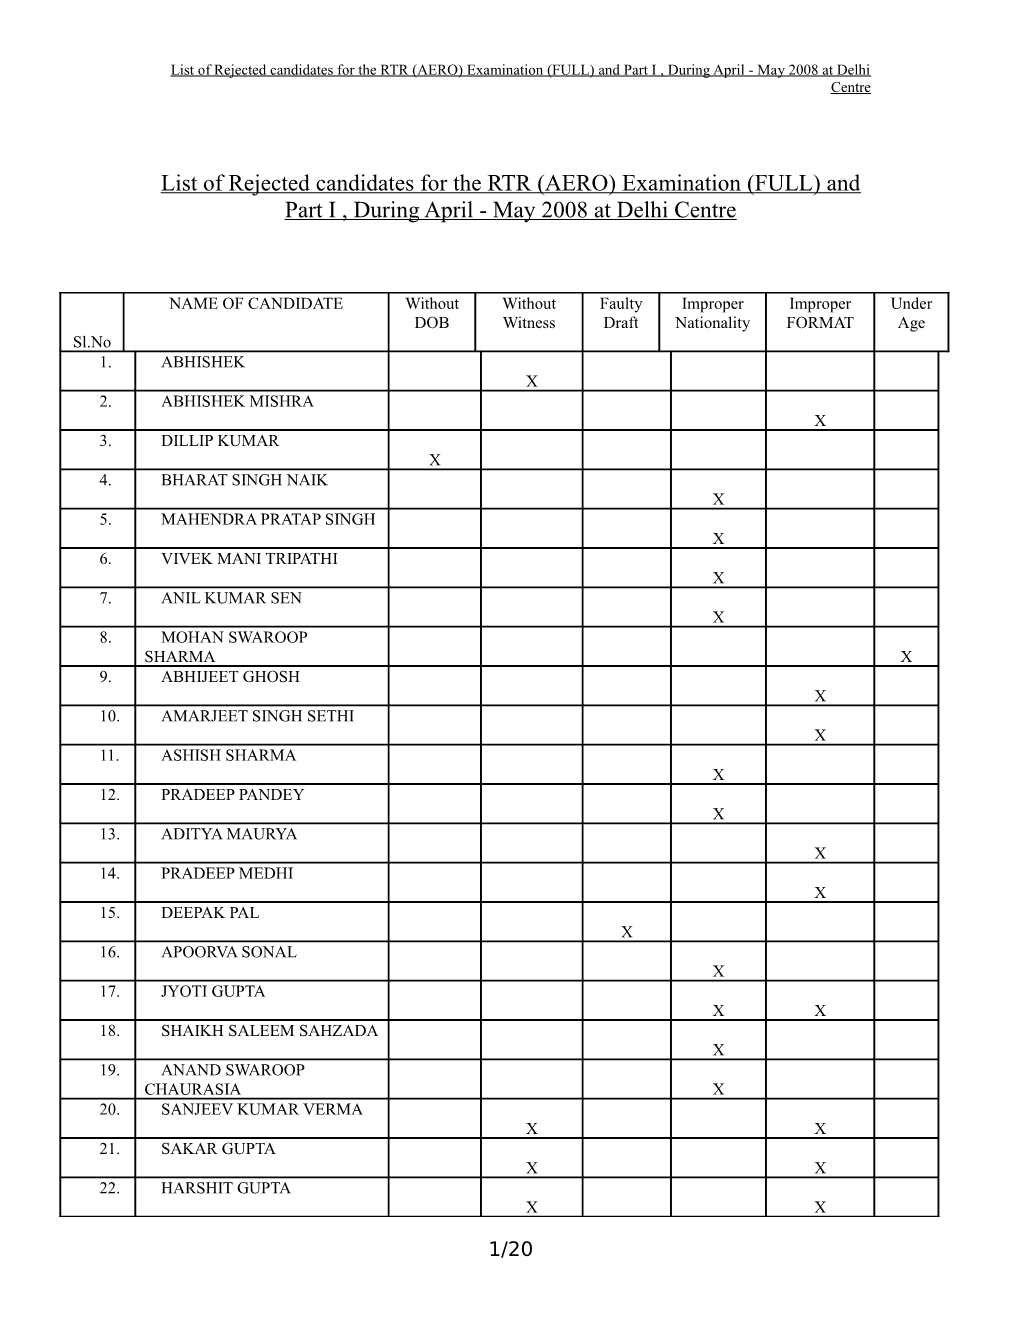 List of Rejected Candidates for the RTR (AERO) Examination (FULL) and Part I , During April